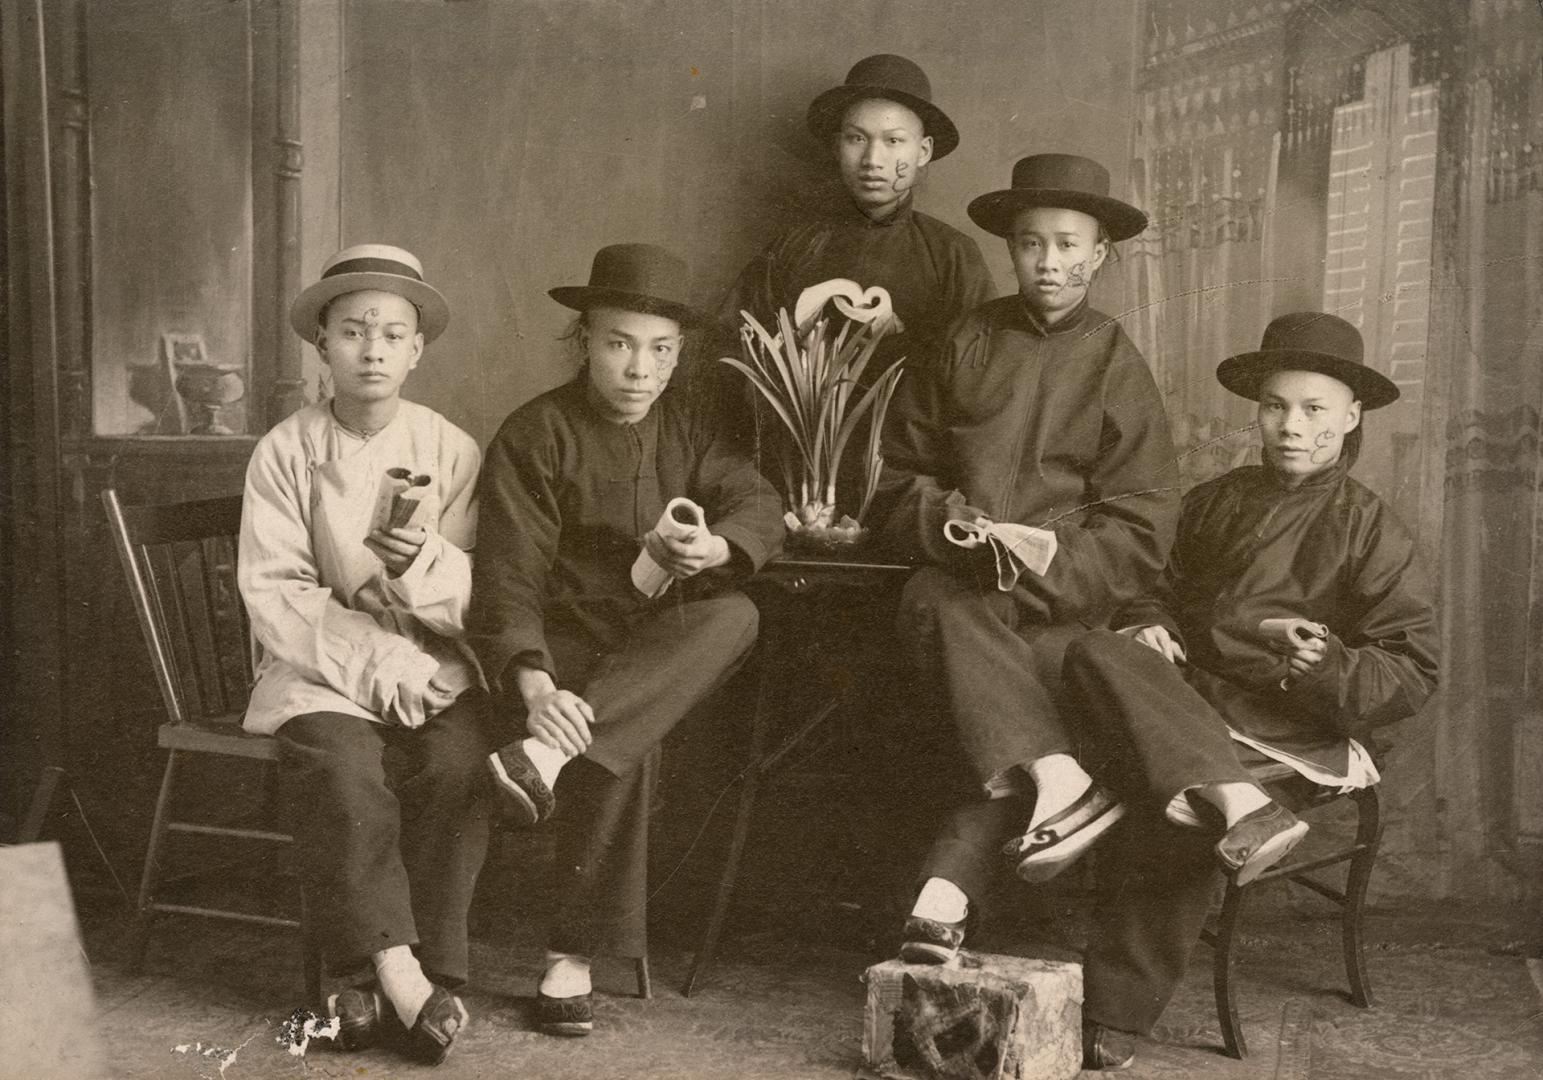 Portrait of five men wearing top hats and holding books